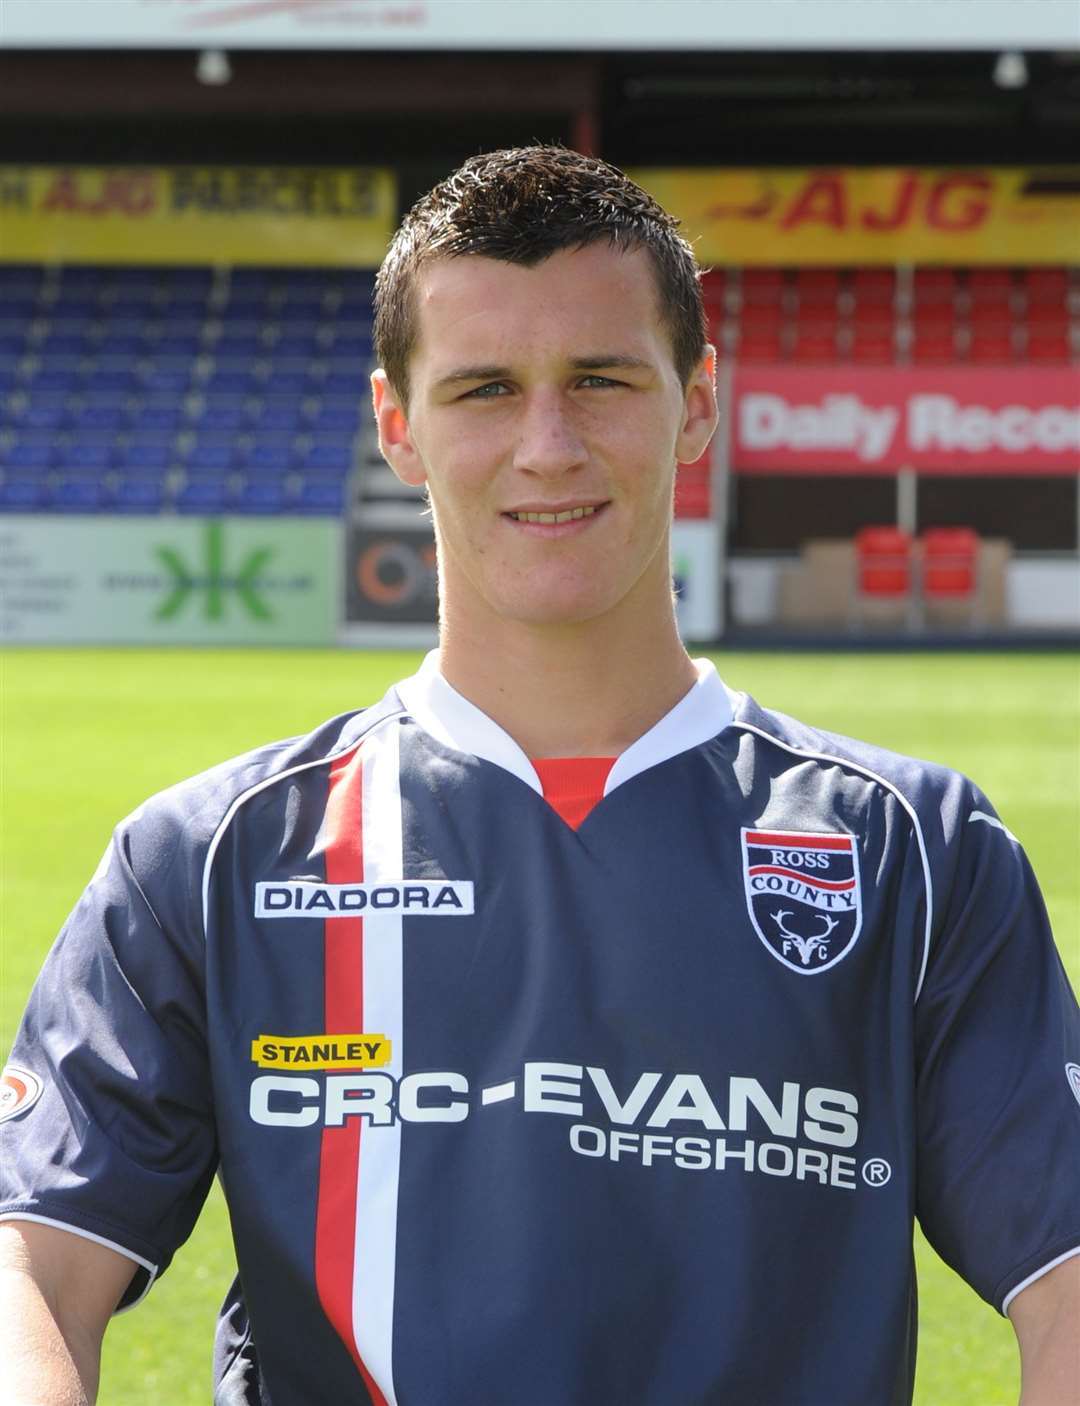 Steven Ross photographed while playing for Ross County.